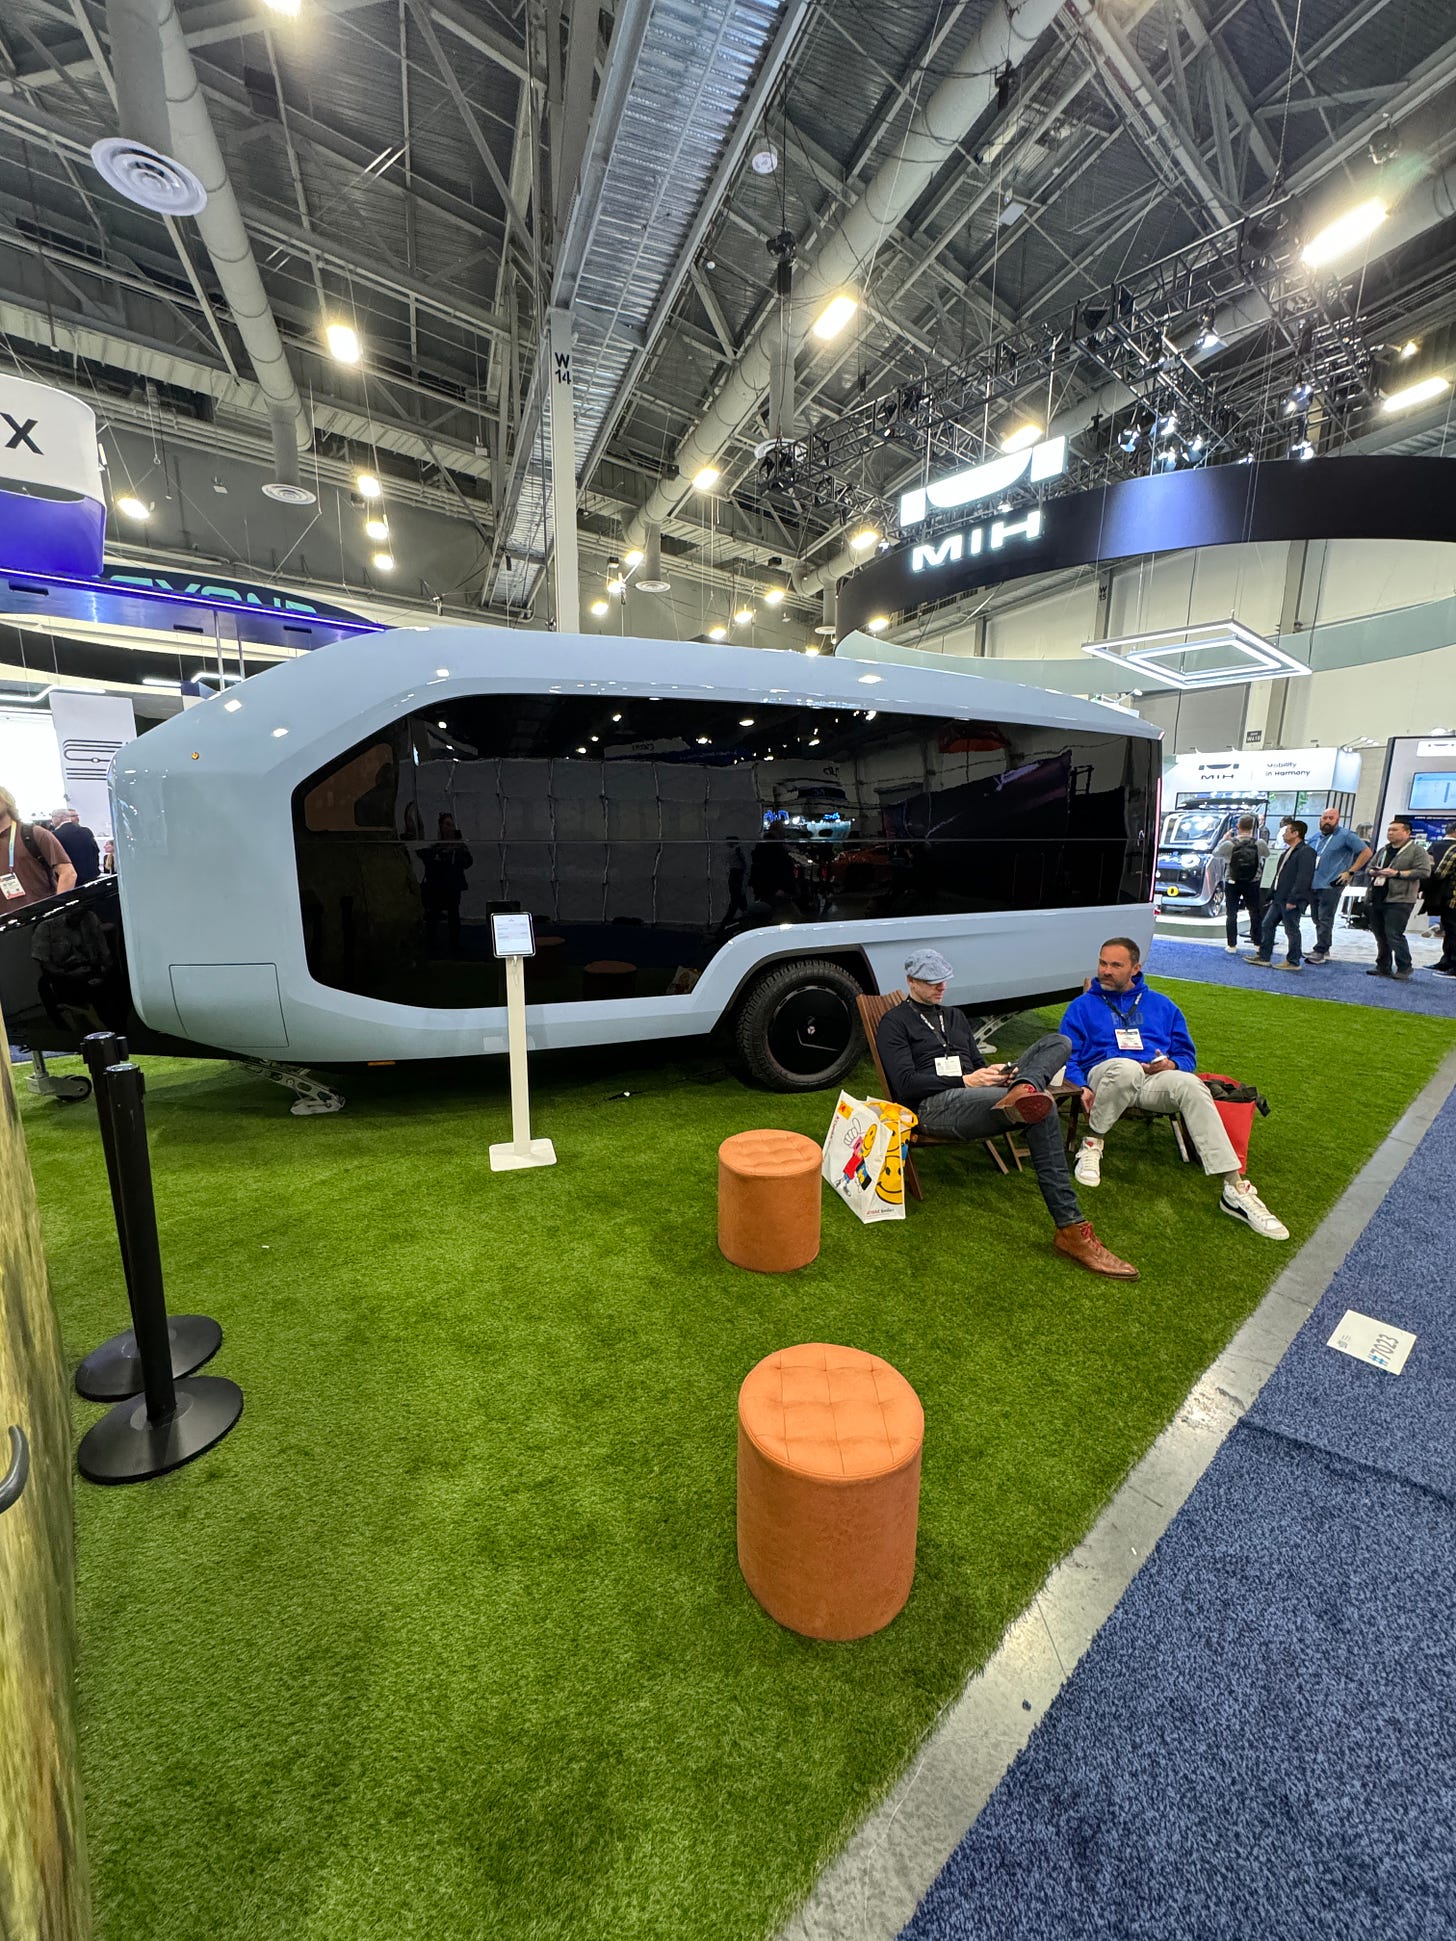 A sleek blue trailer with black windows that wrap all the way around, parked in a convention center on faux grass with conference-goers hanging out on chairs in front of it.